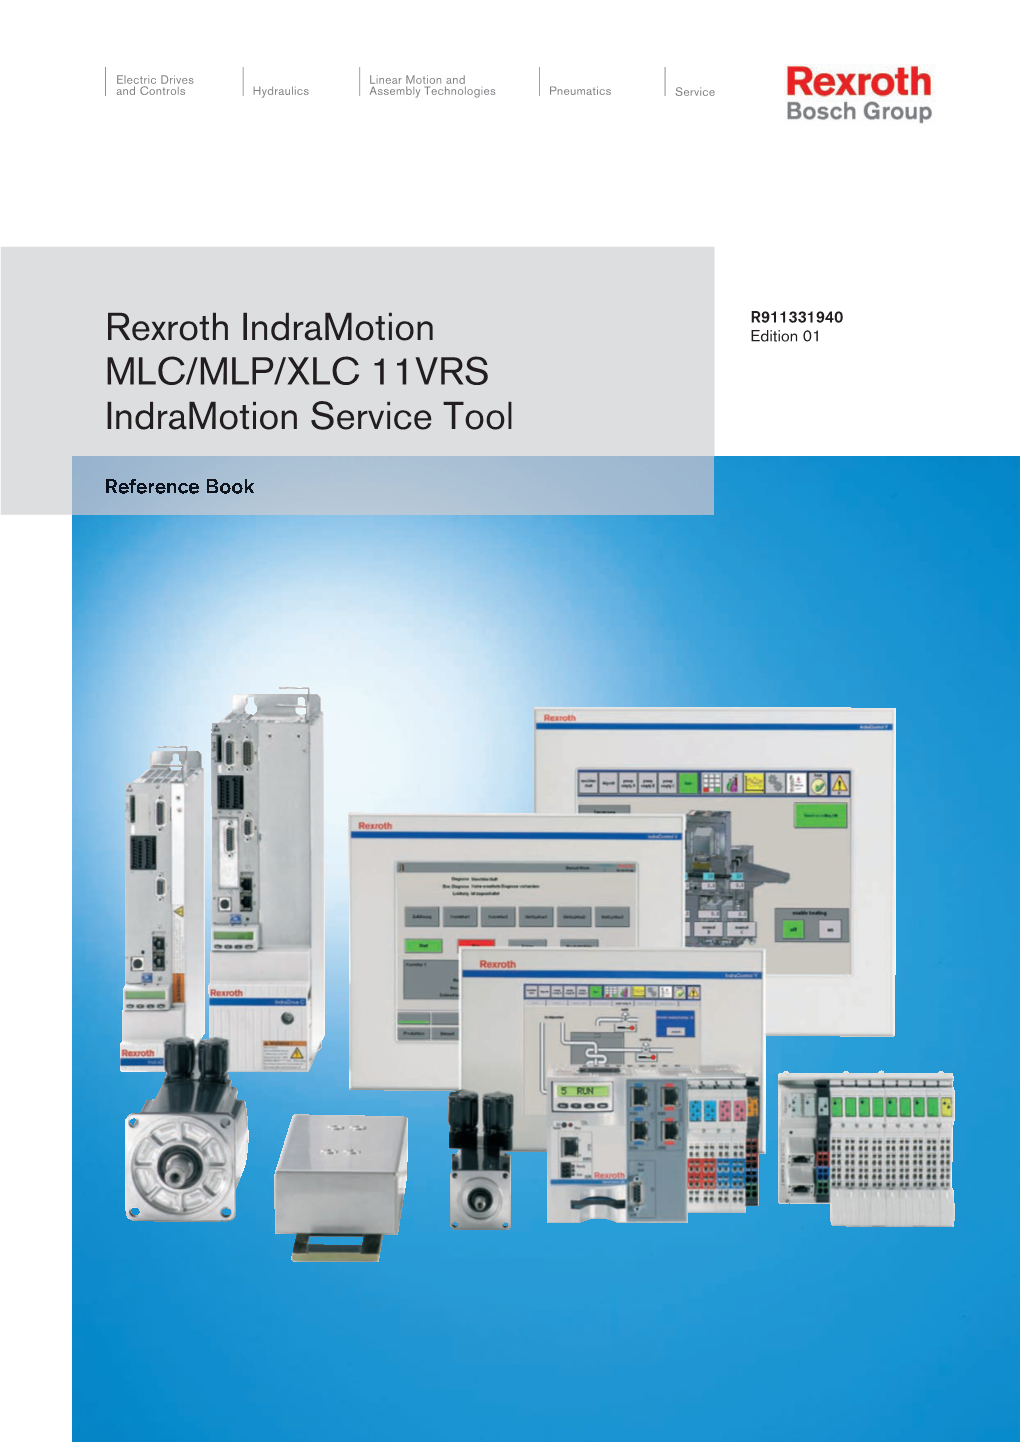 Rexroth Indramotion MLC/MLP/XLC 11VRS Indramotion Service Tool